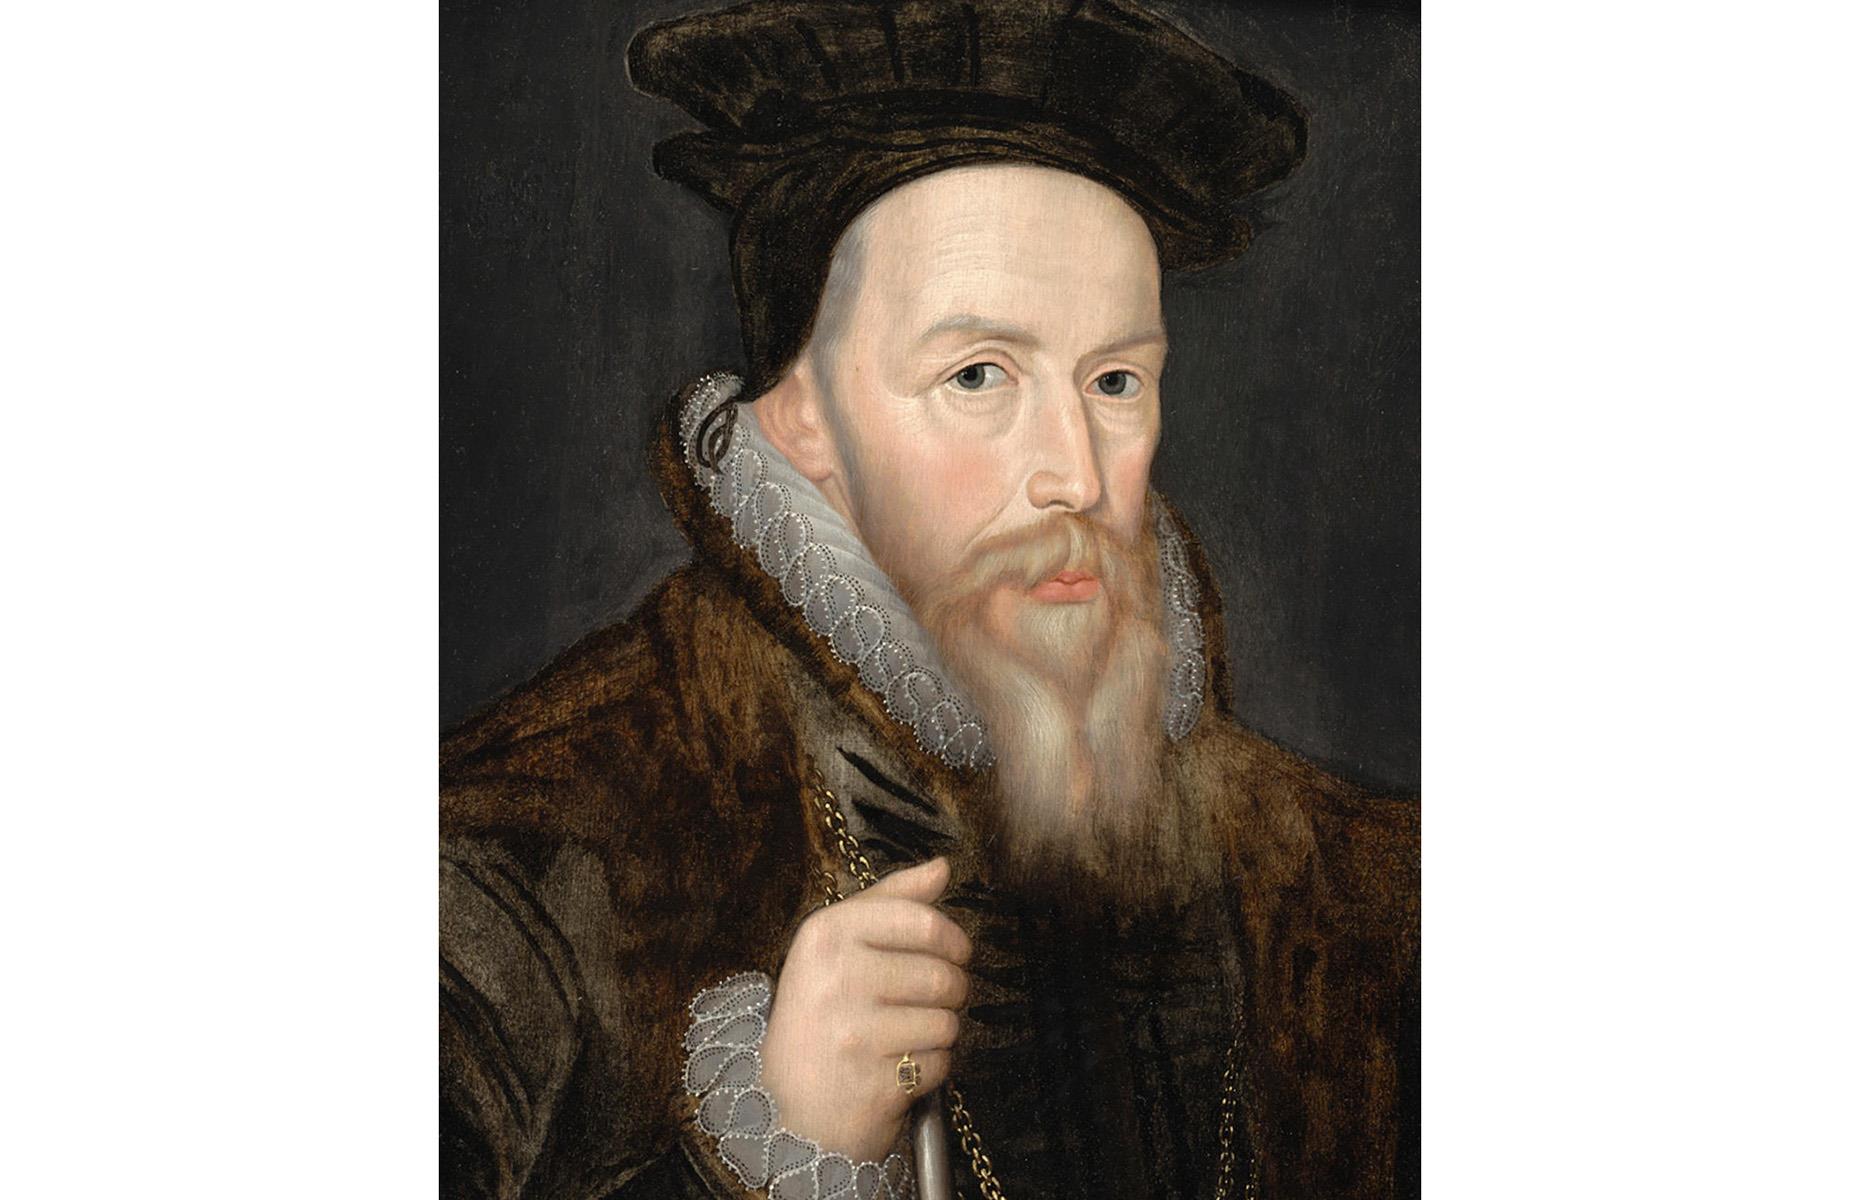 <p>Burghley House was commissioned by <a href="https://burghley.co.uk/about-us/the-family/history-of-the-family">William Cecil, the first Baron Burghley</a>, one of the most powerful and influential advisors in Queen Elizabeth I’s privy council. William was knighted in 1572 and went on to serve as secretary, Lord Treasurer and Chief Minister to Elizabeth, with whom he built a close personal relationship.</p>  <p>In return, Elizabeth rewarded the newly minted Lord Burghley with vast land grants. Burghley House was already a substantial residence in 1571 and Cecil hadn't held back on spending his money on its decoration and maintenance. But after Elizabeth showed him favour, he dedicated the next 30 years of his life to fashioning it into his dynastic family seat in her honour. </p>